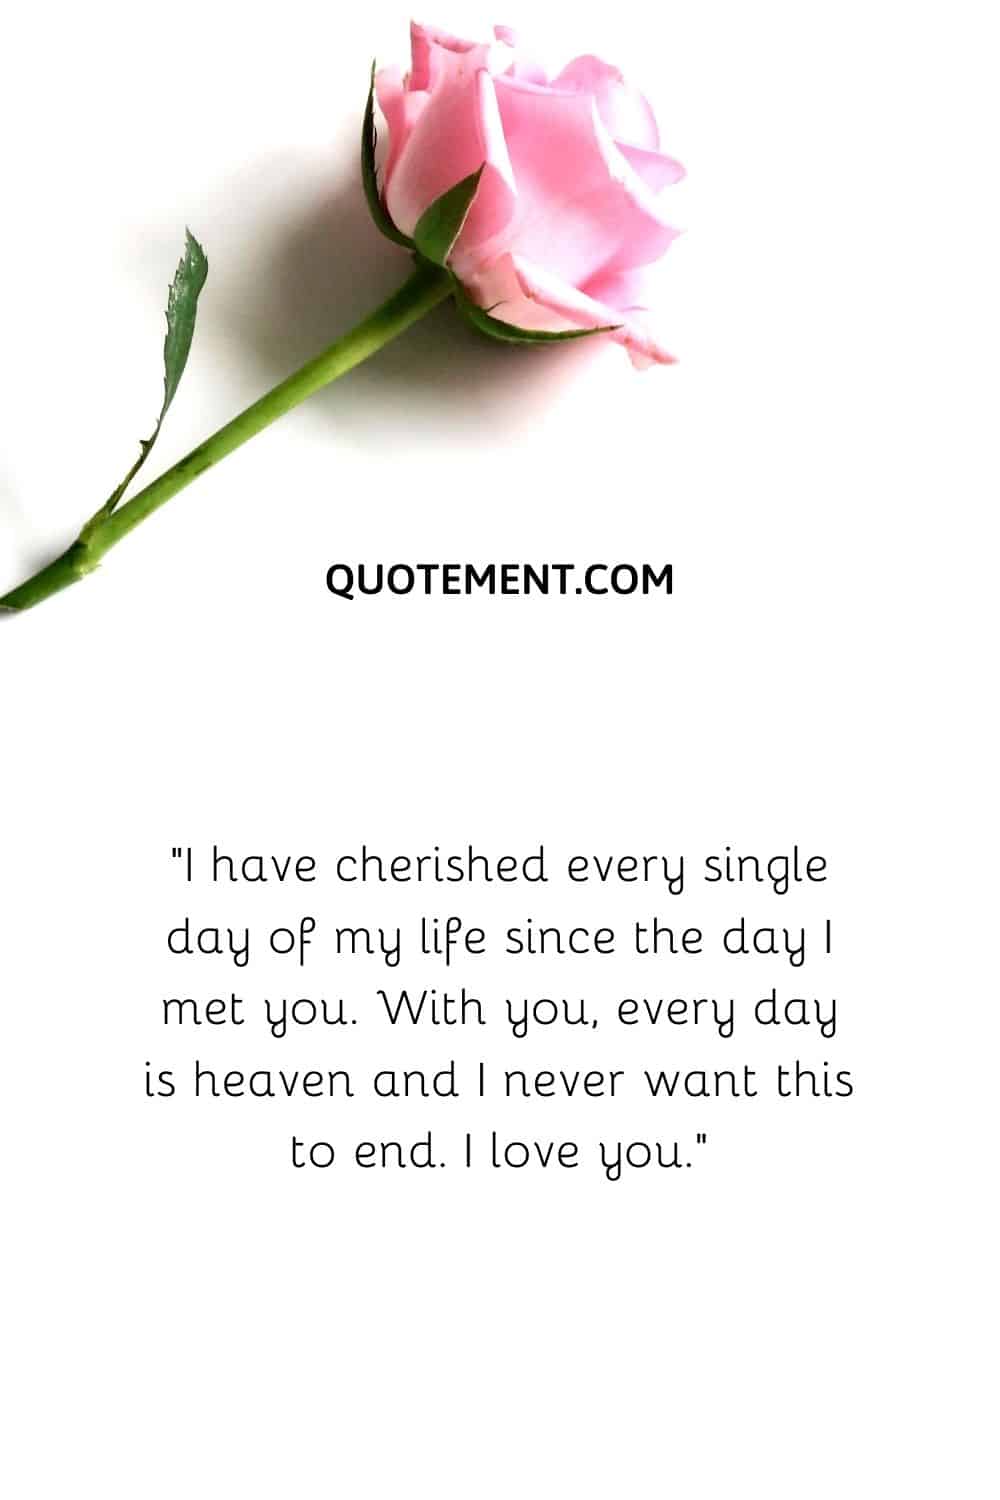 I have cherished every single day of my life since the day I met you